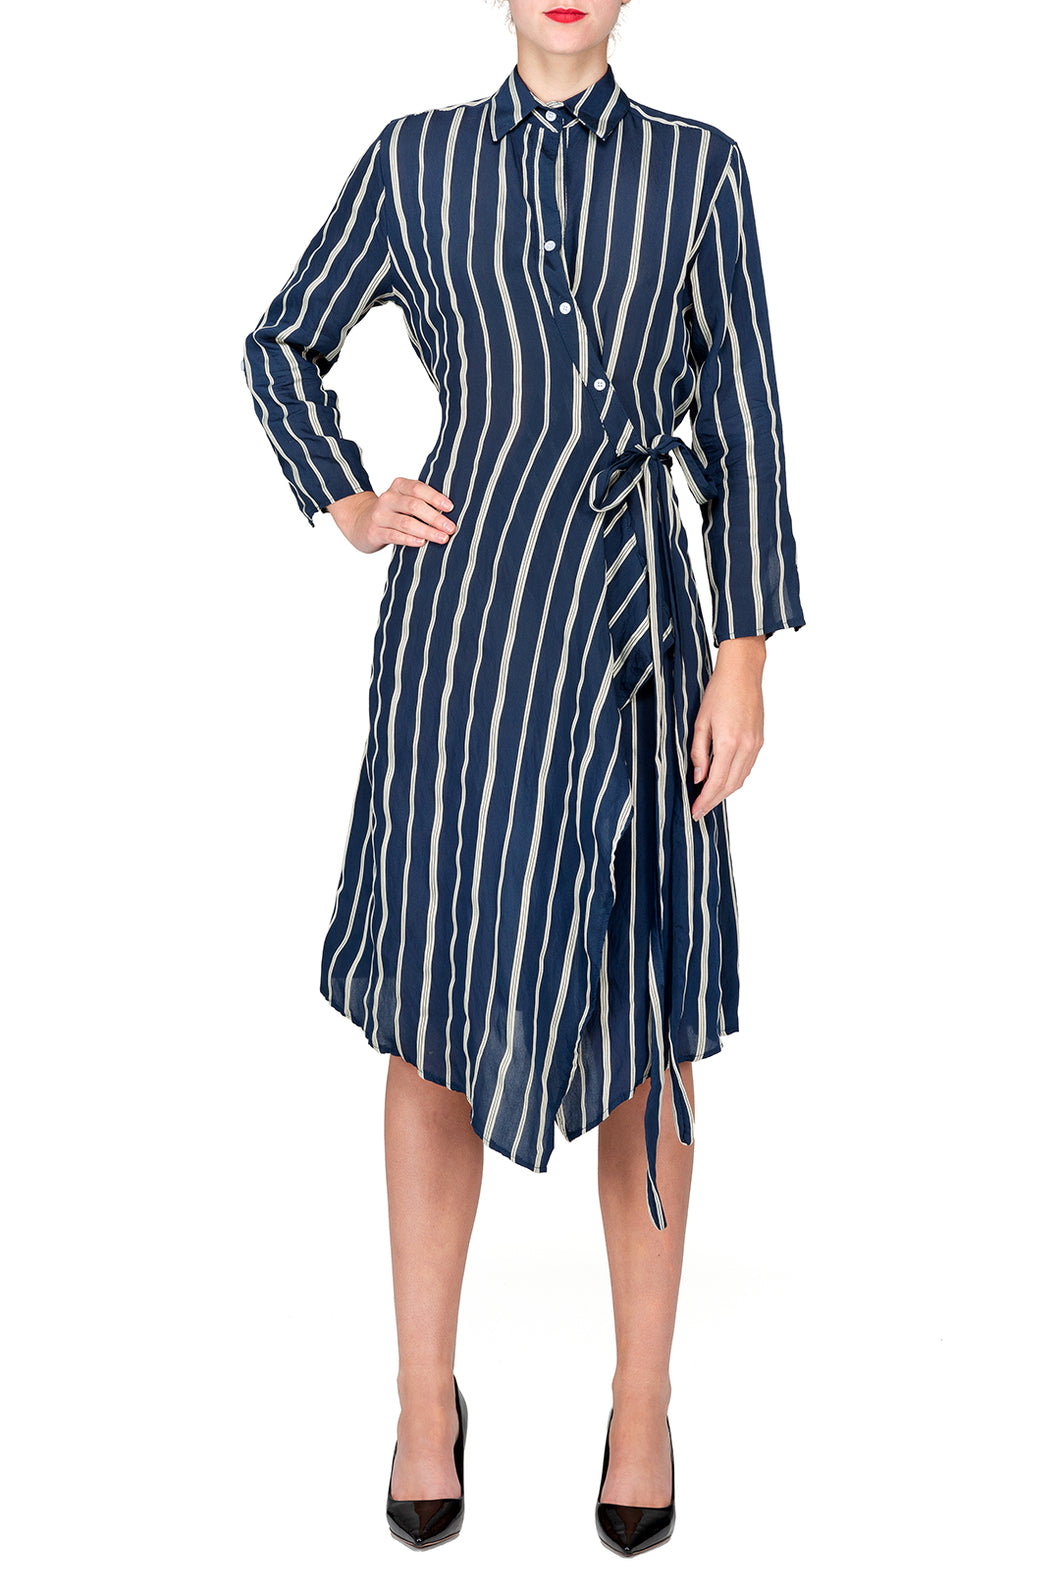 TWO PEARS-Long Sleeve Waist Belted Wrapped Surplice Dress